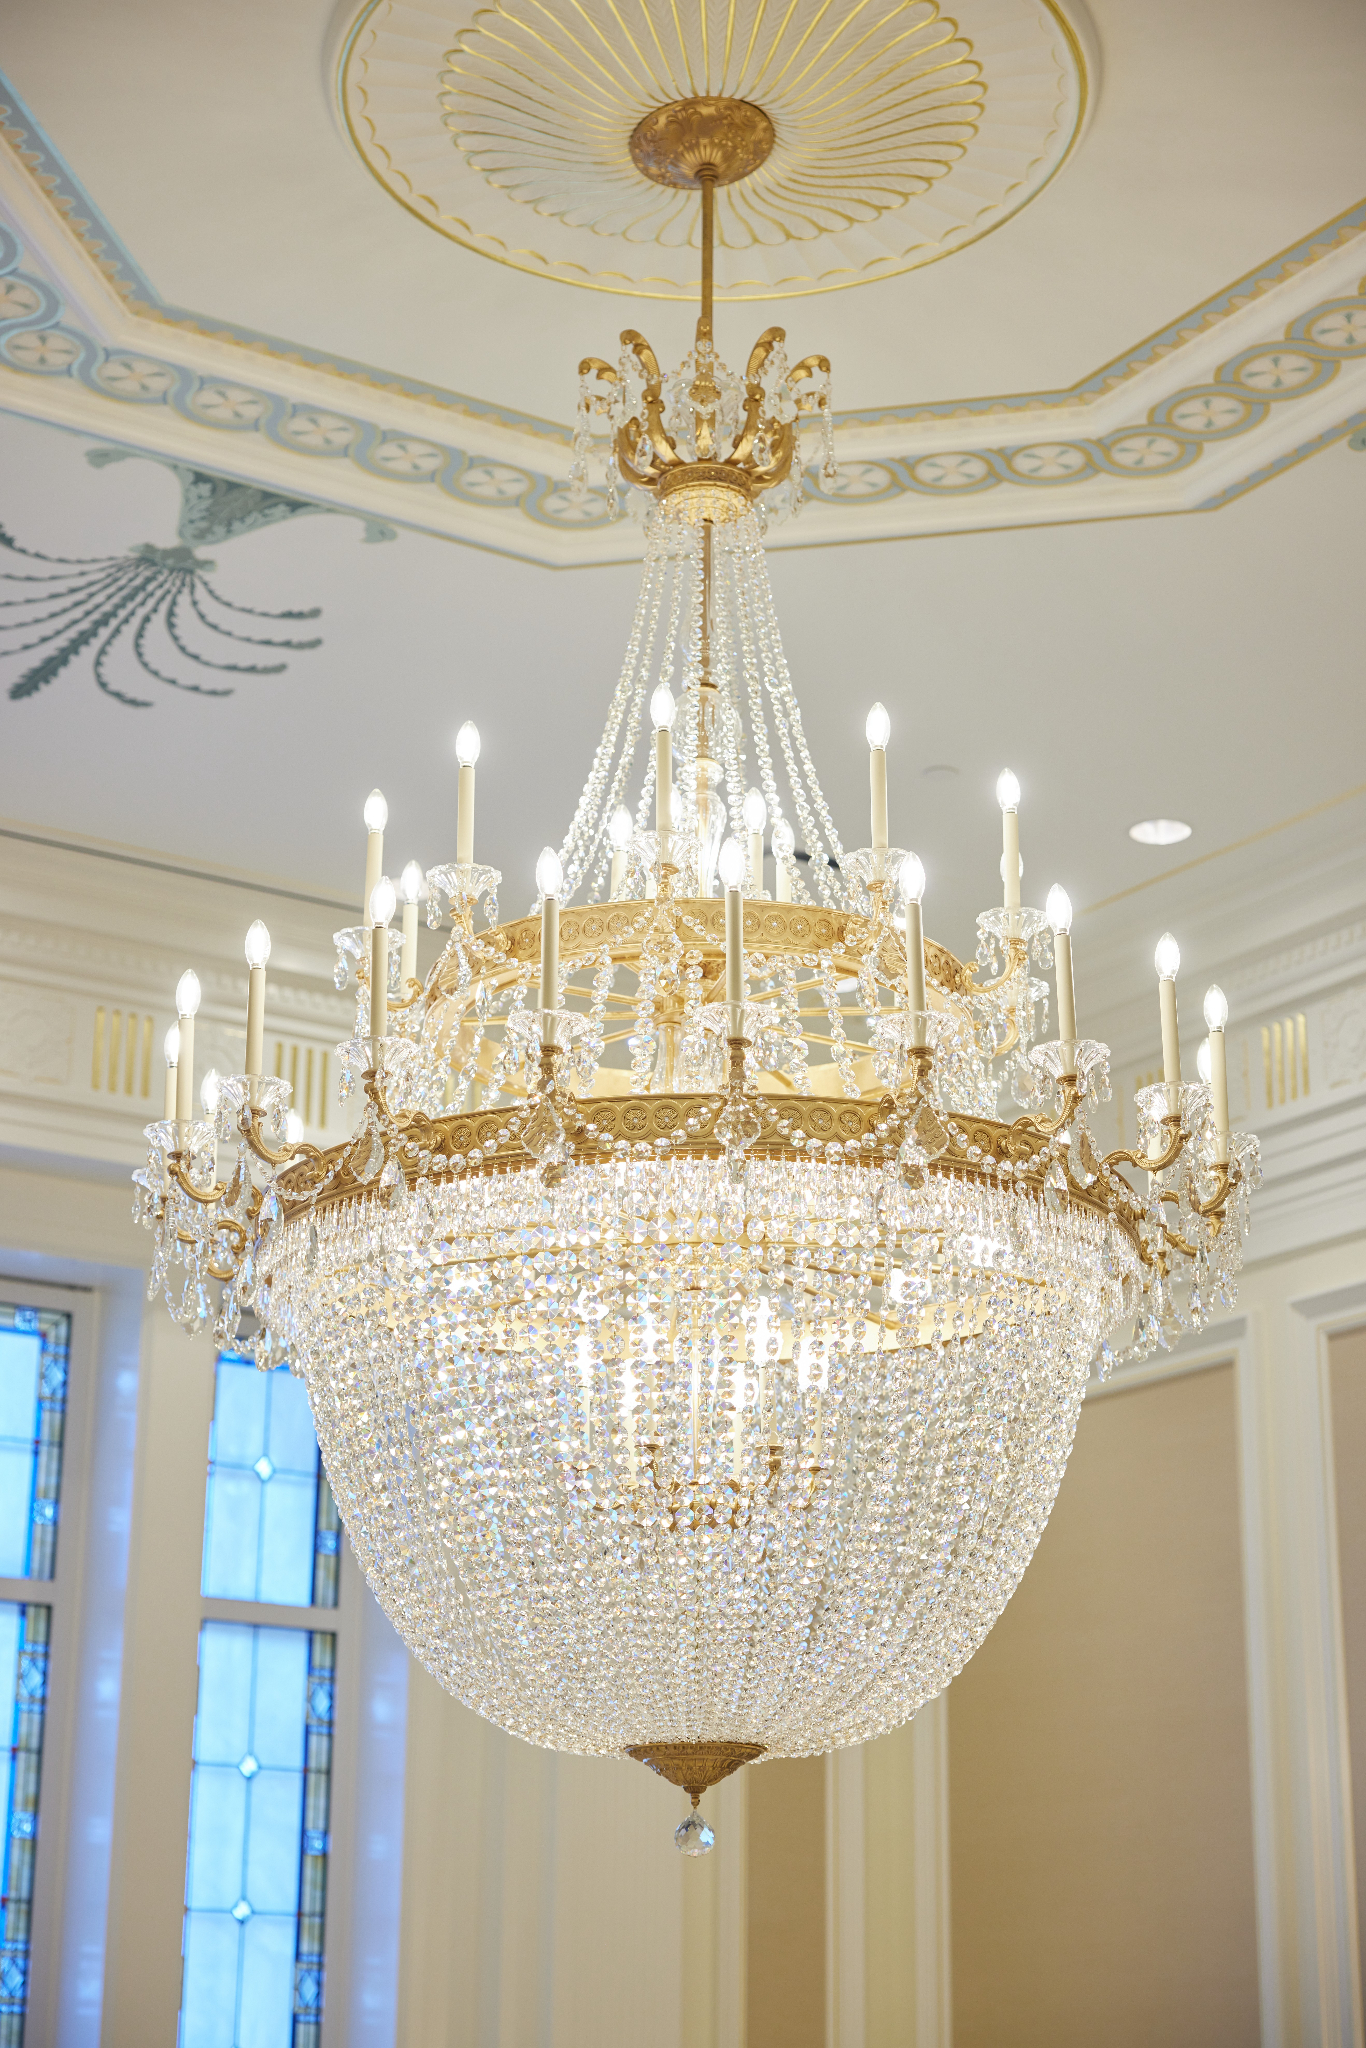 A large chandelier with many pieces of glass throughout and small lightbulbs around the top.